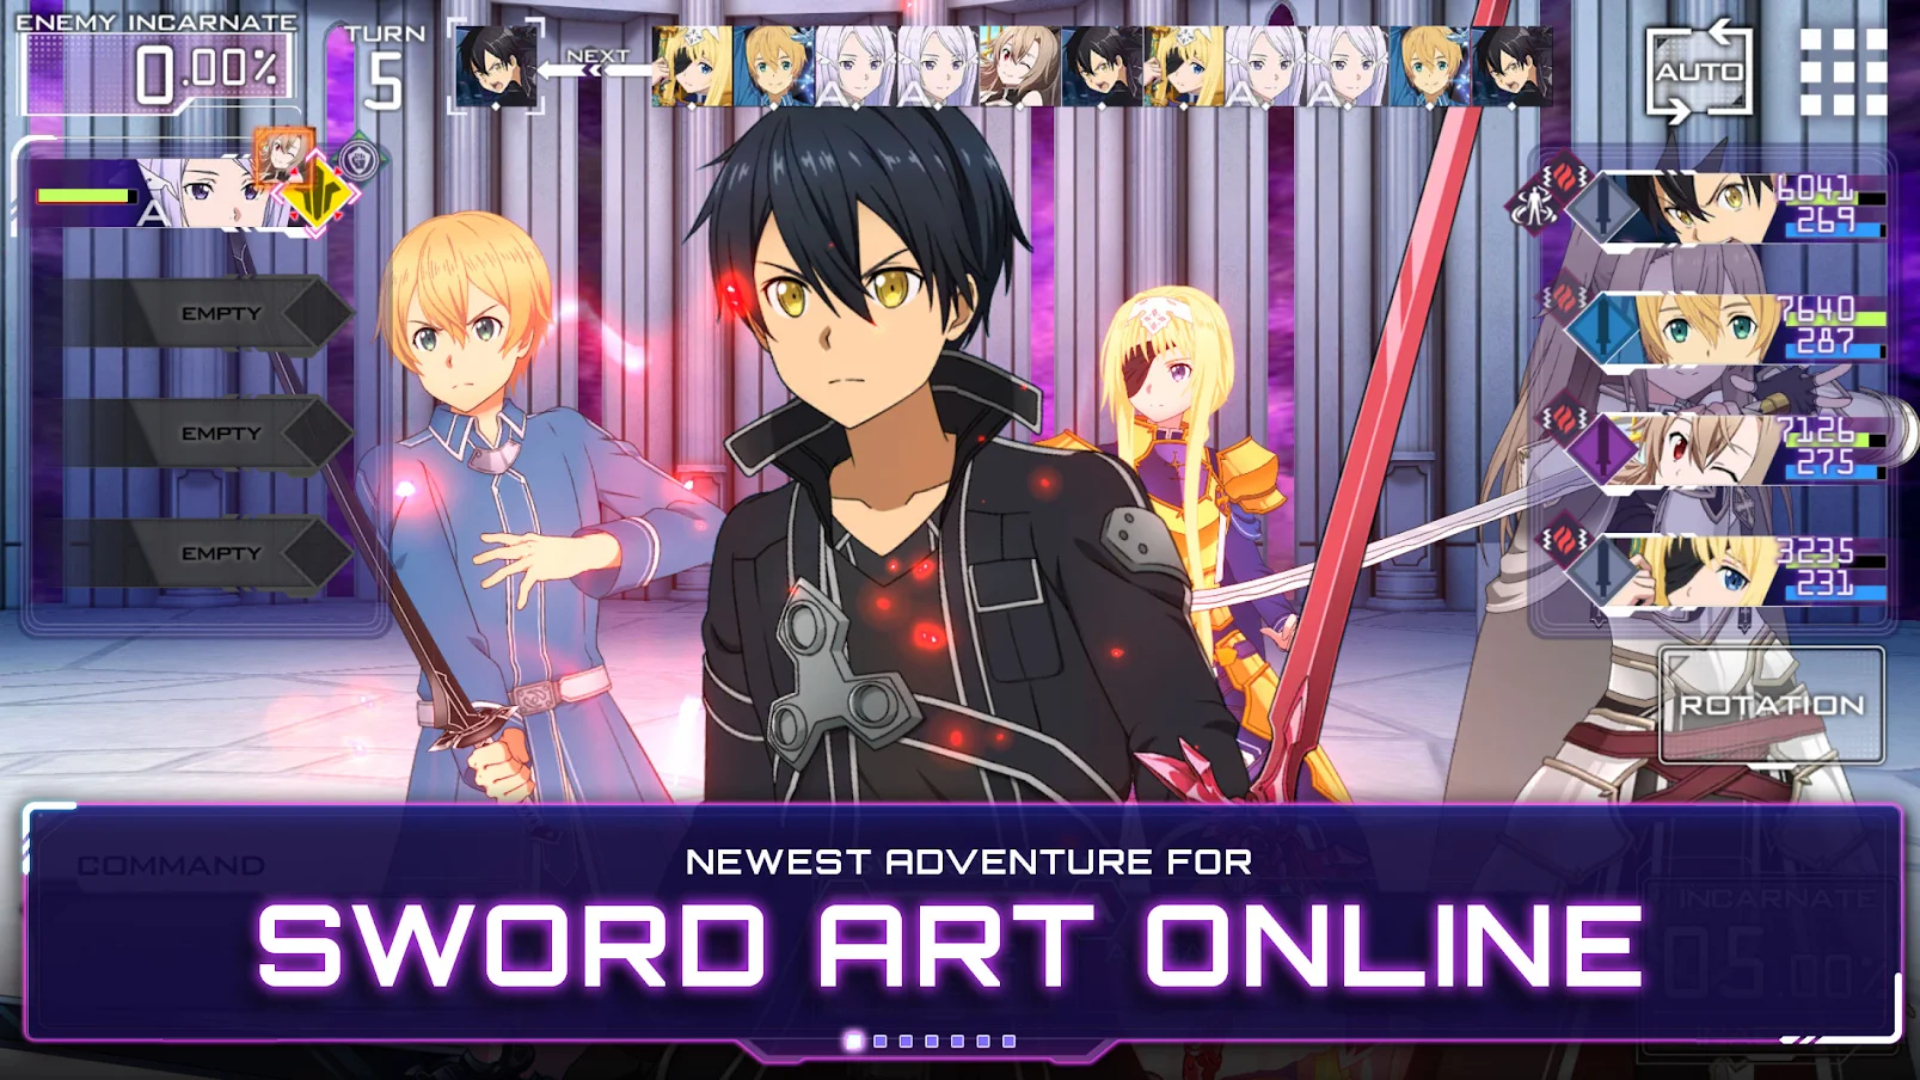 You can sign up for the newest Sword Art Online game right now!